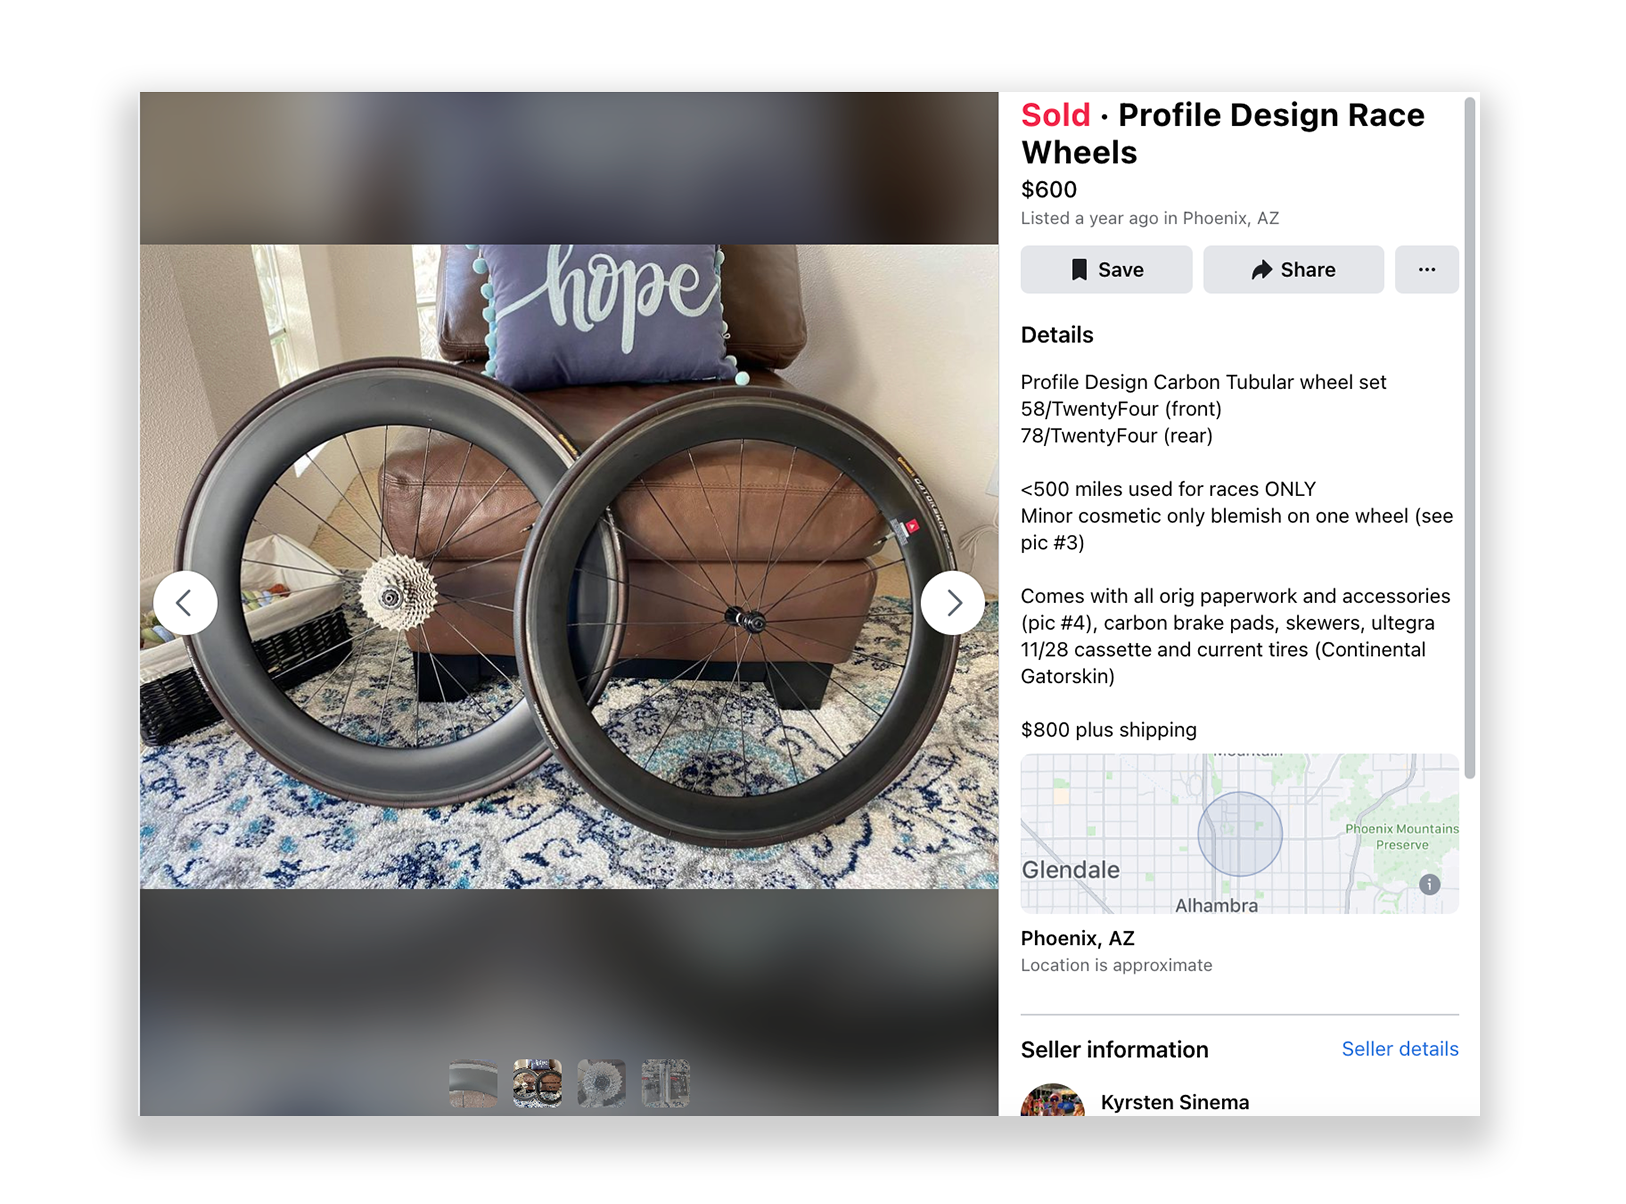 An image of bike wheels in front of a pillow that says "hope," alongside pricing and description in a Facebook Marketplace listing.